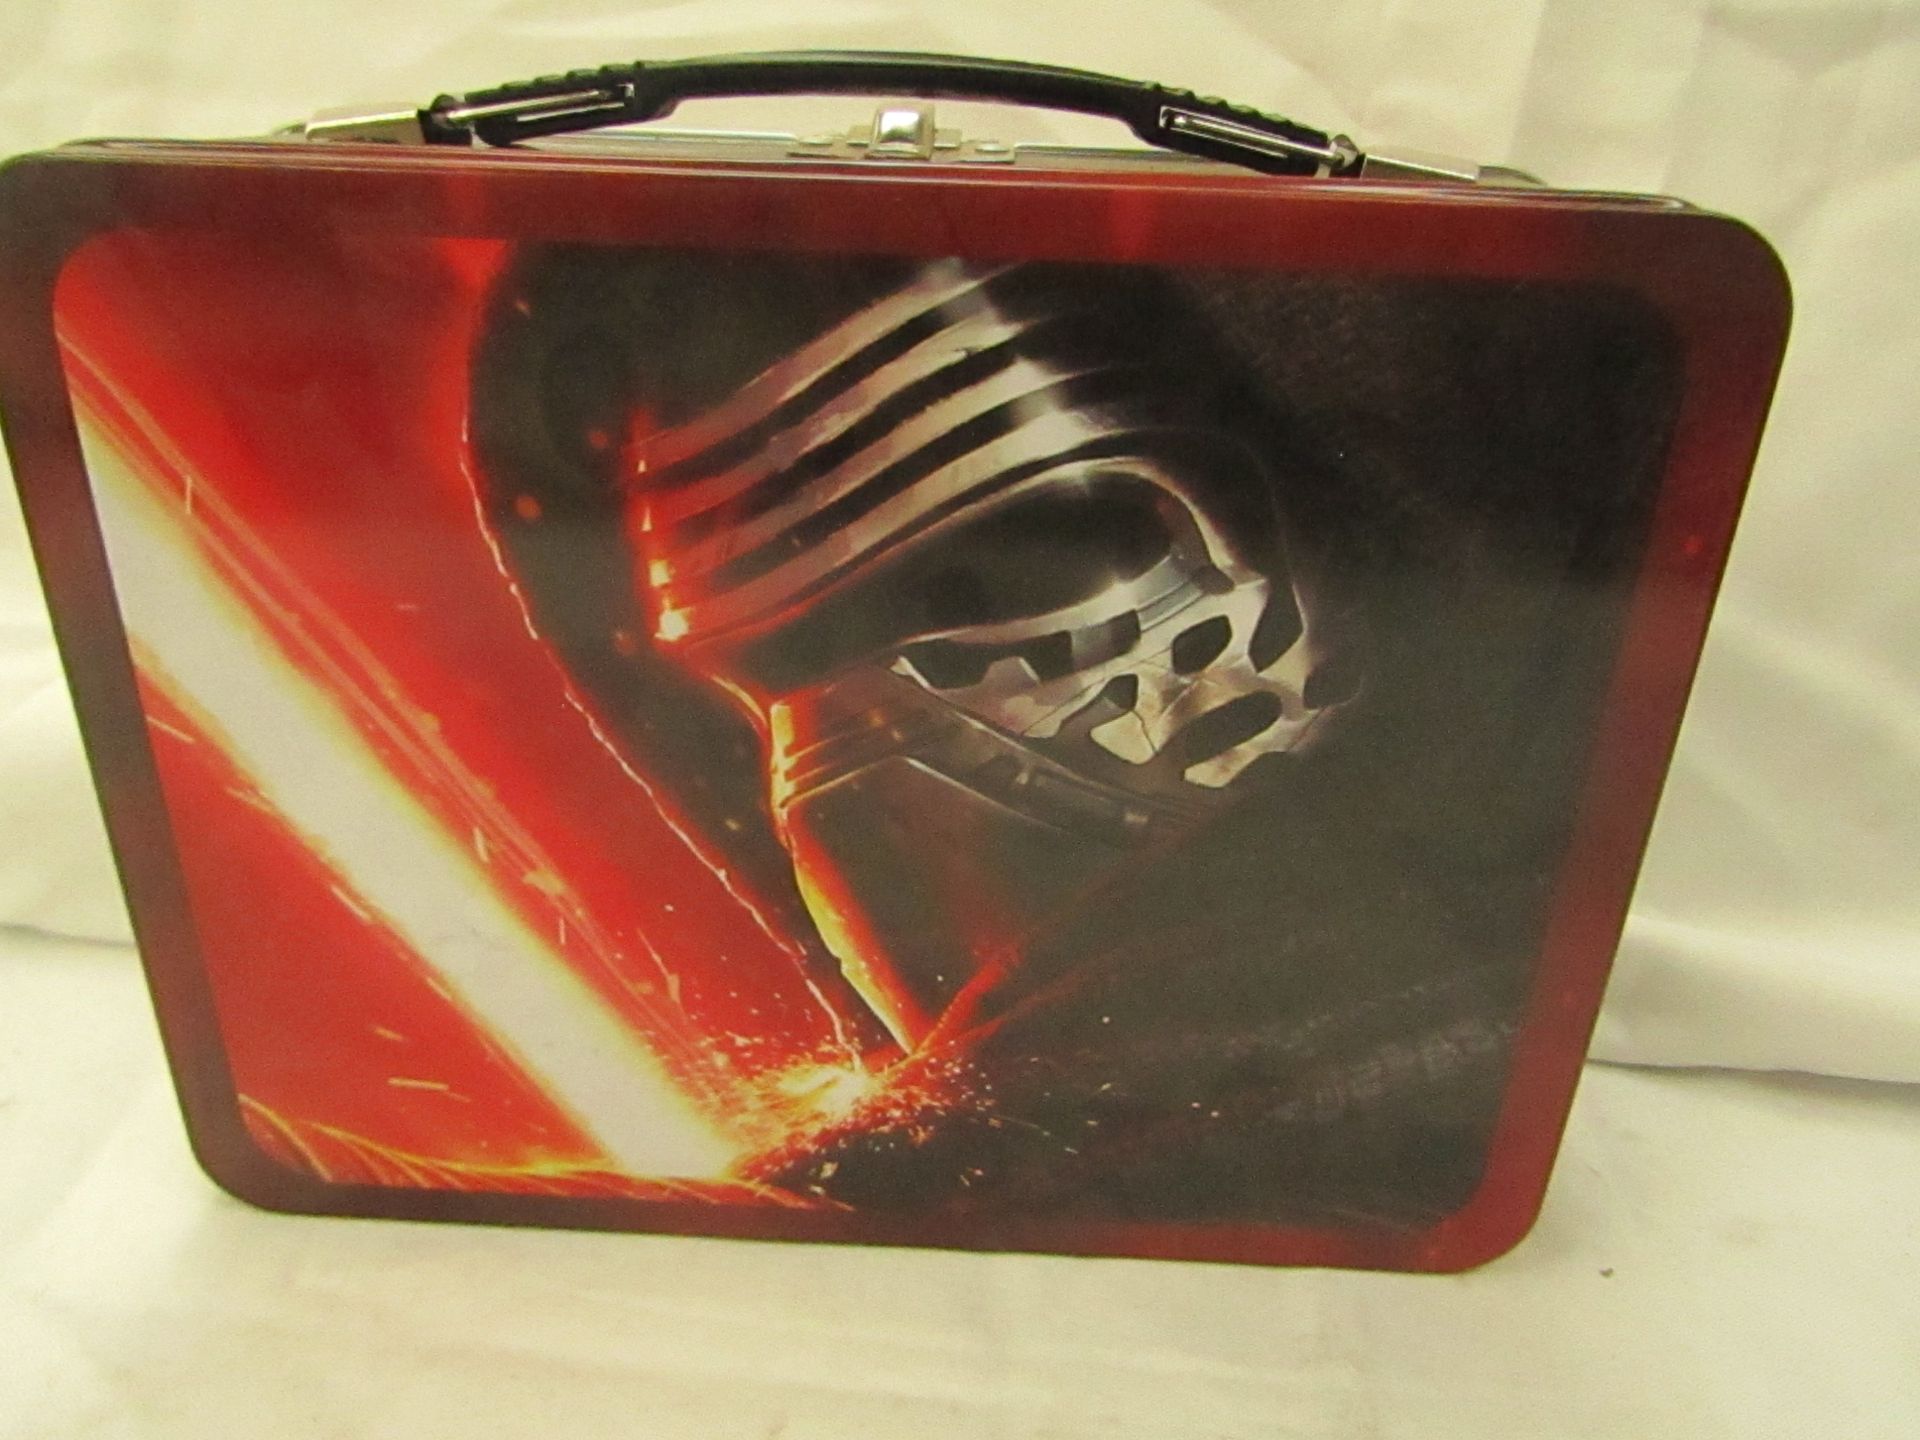 4x Star Wars - The Force Awakens Large Lunch Tin - New & Packaged.